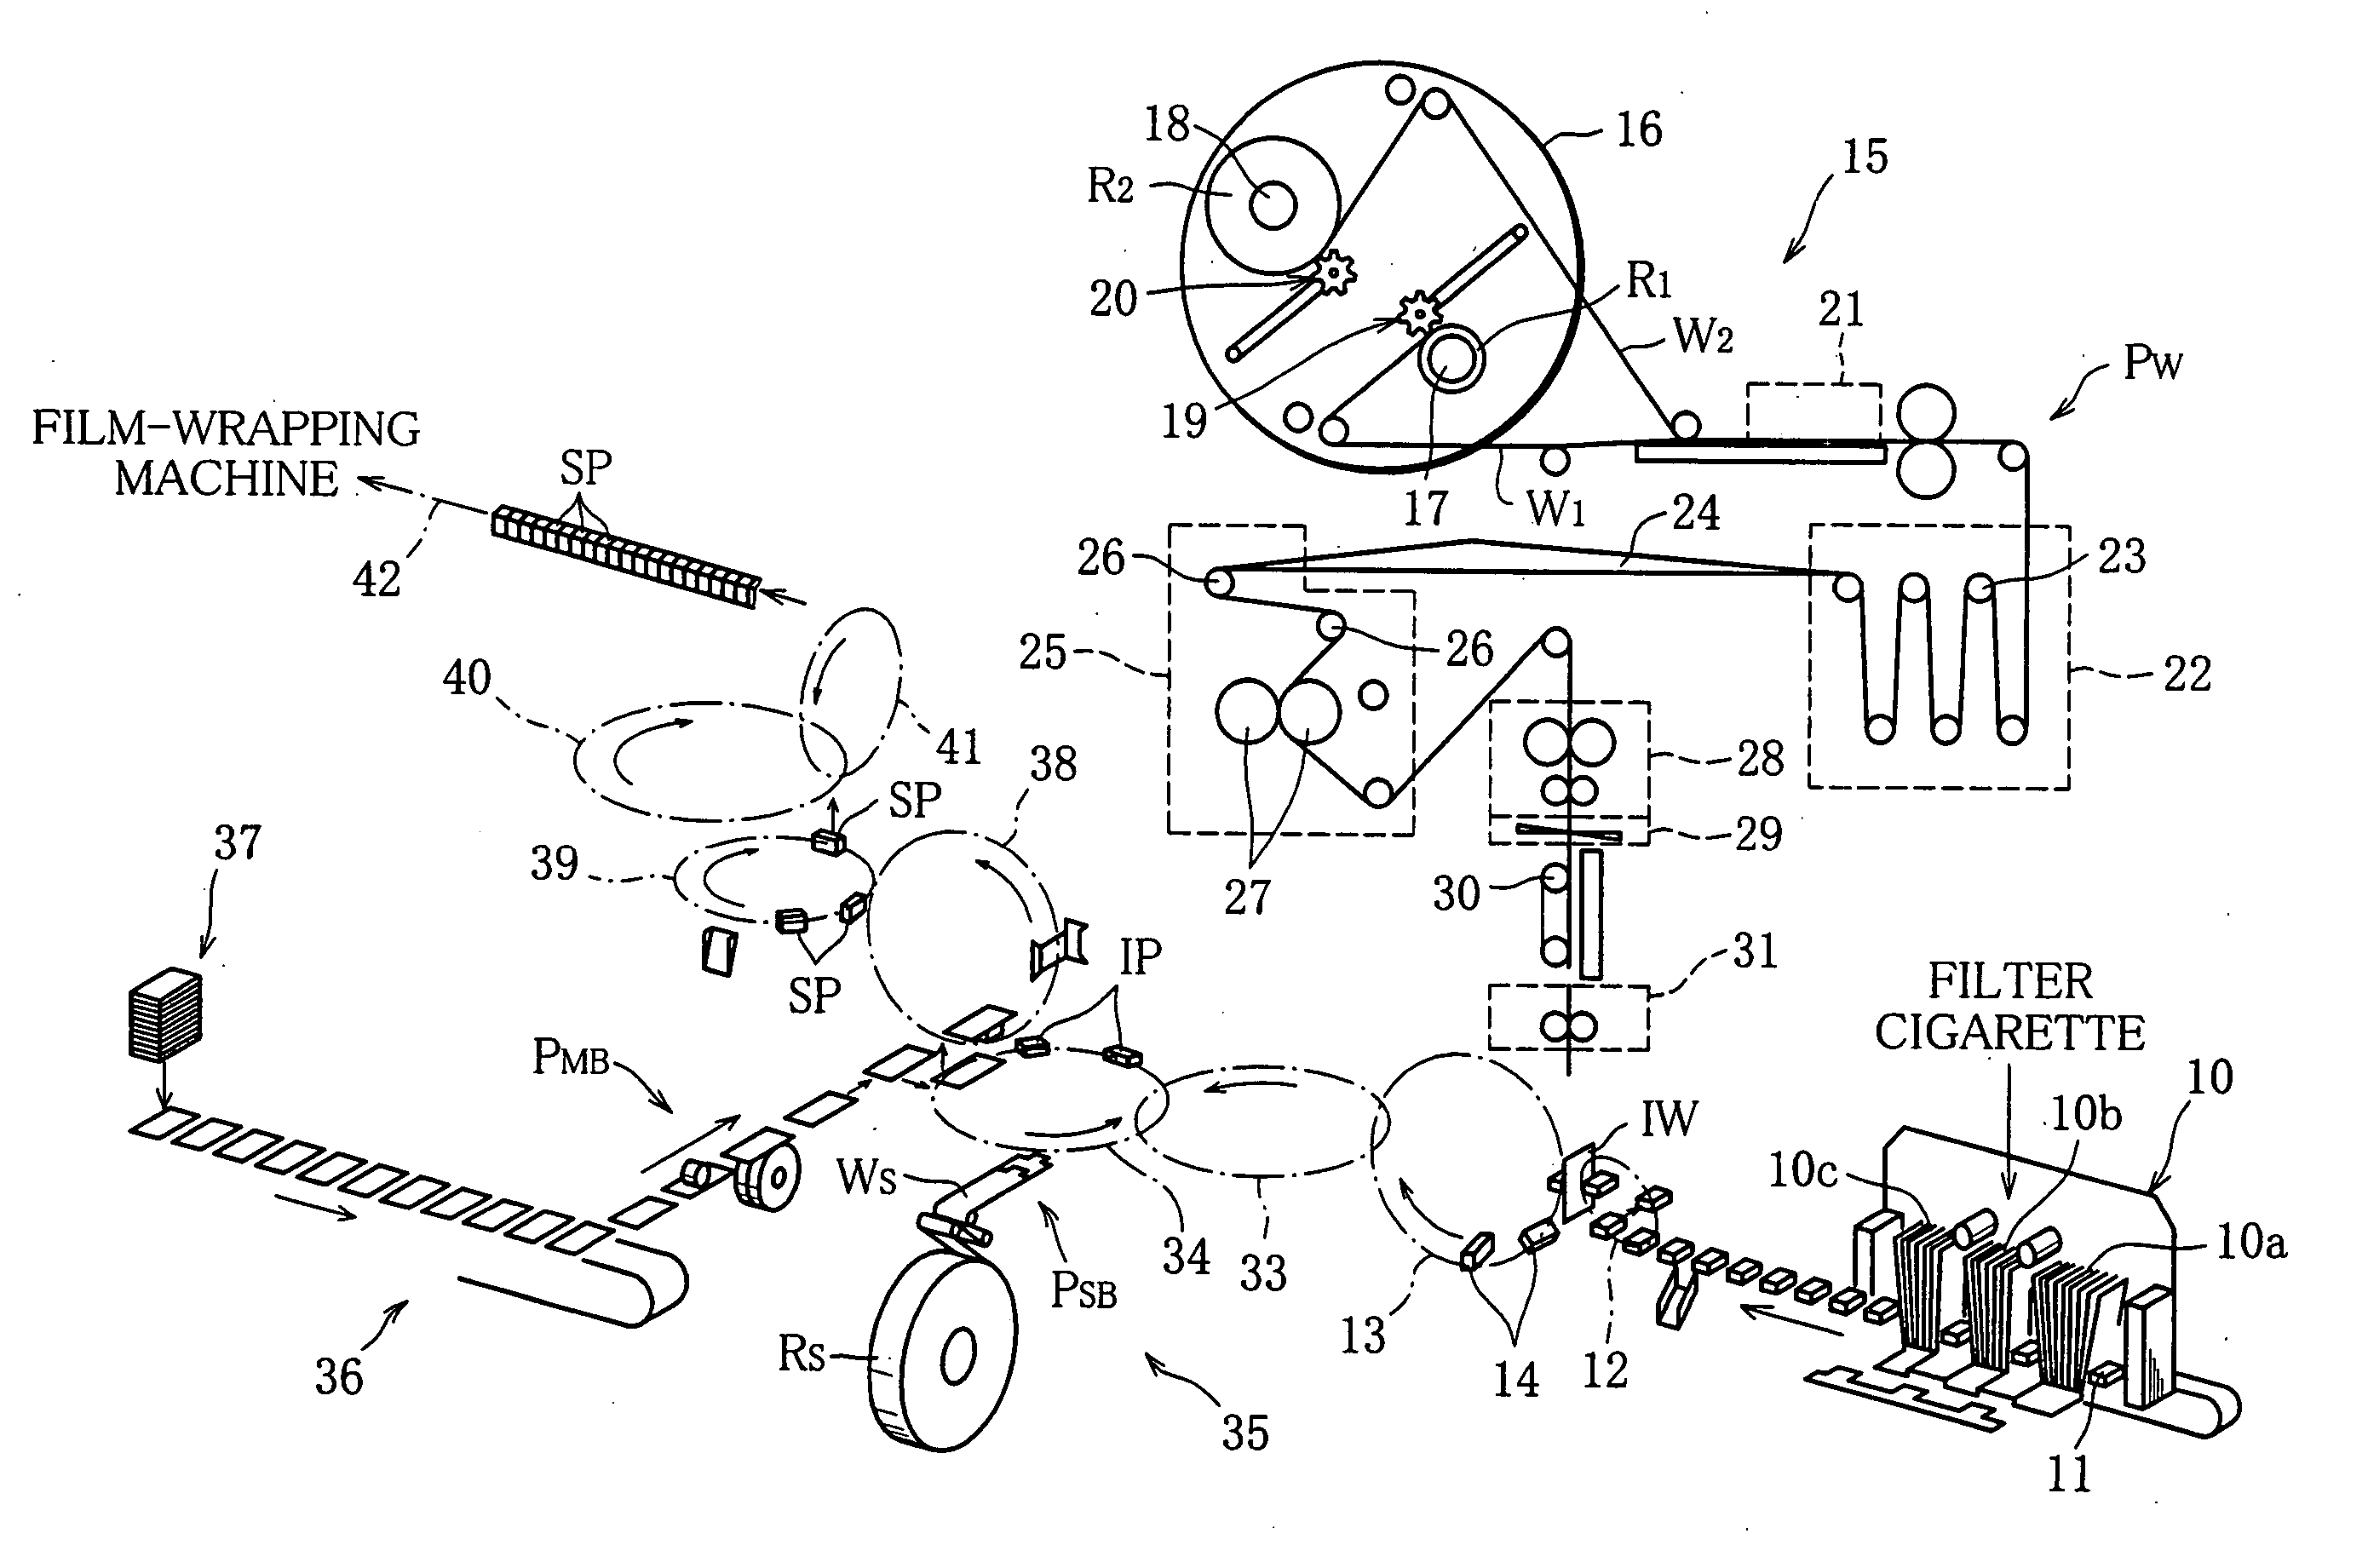 Apparatus for feeding inner wrapper for wrapping cigarette bundles